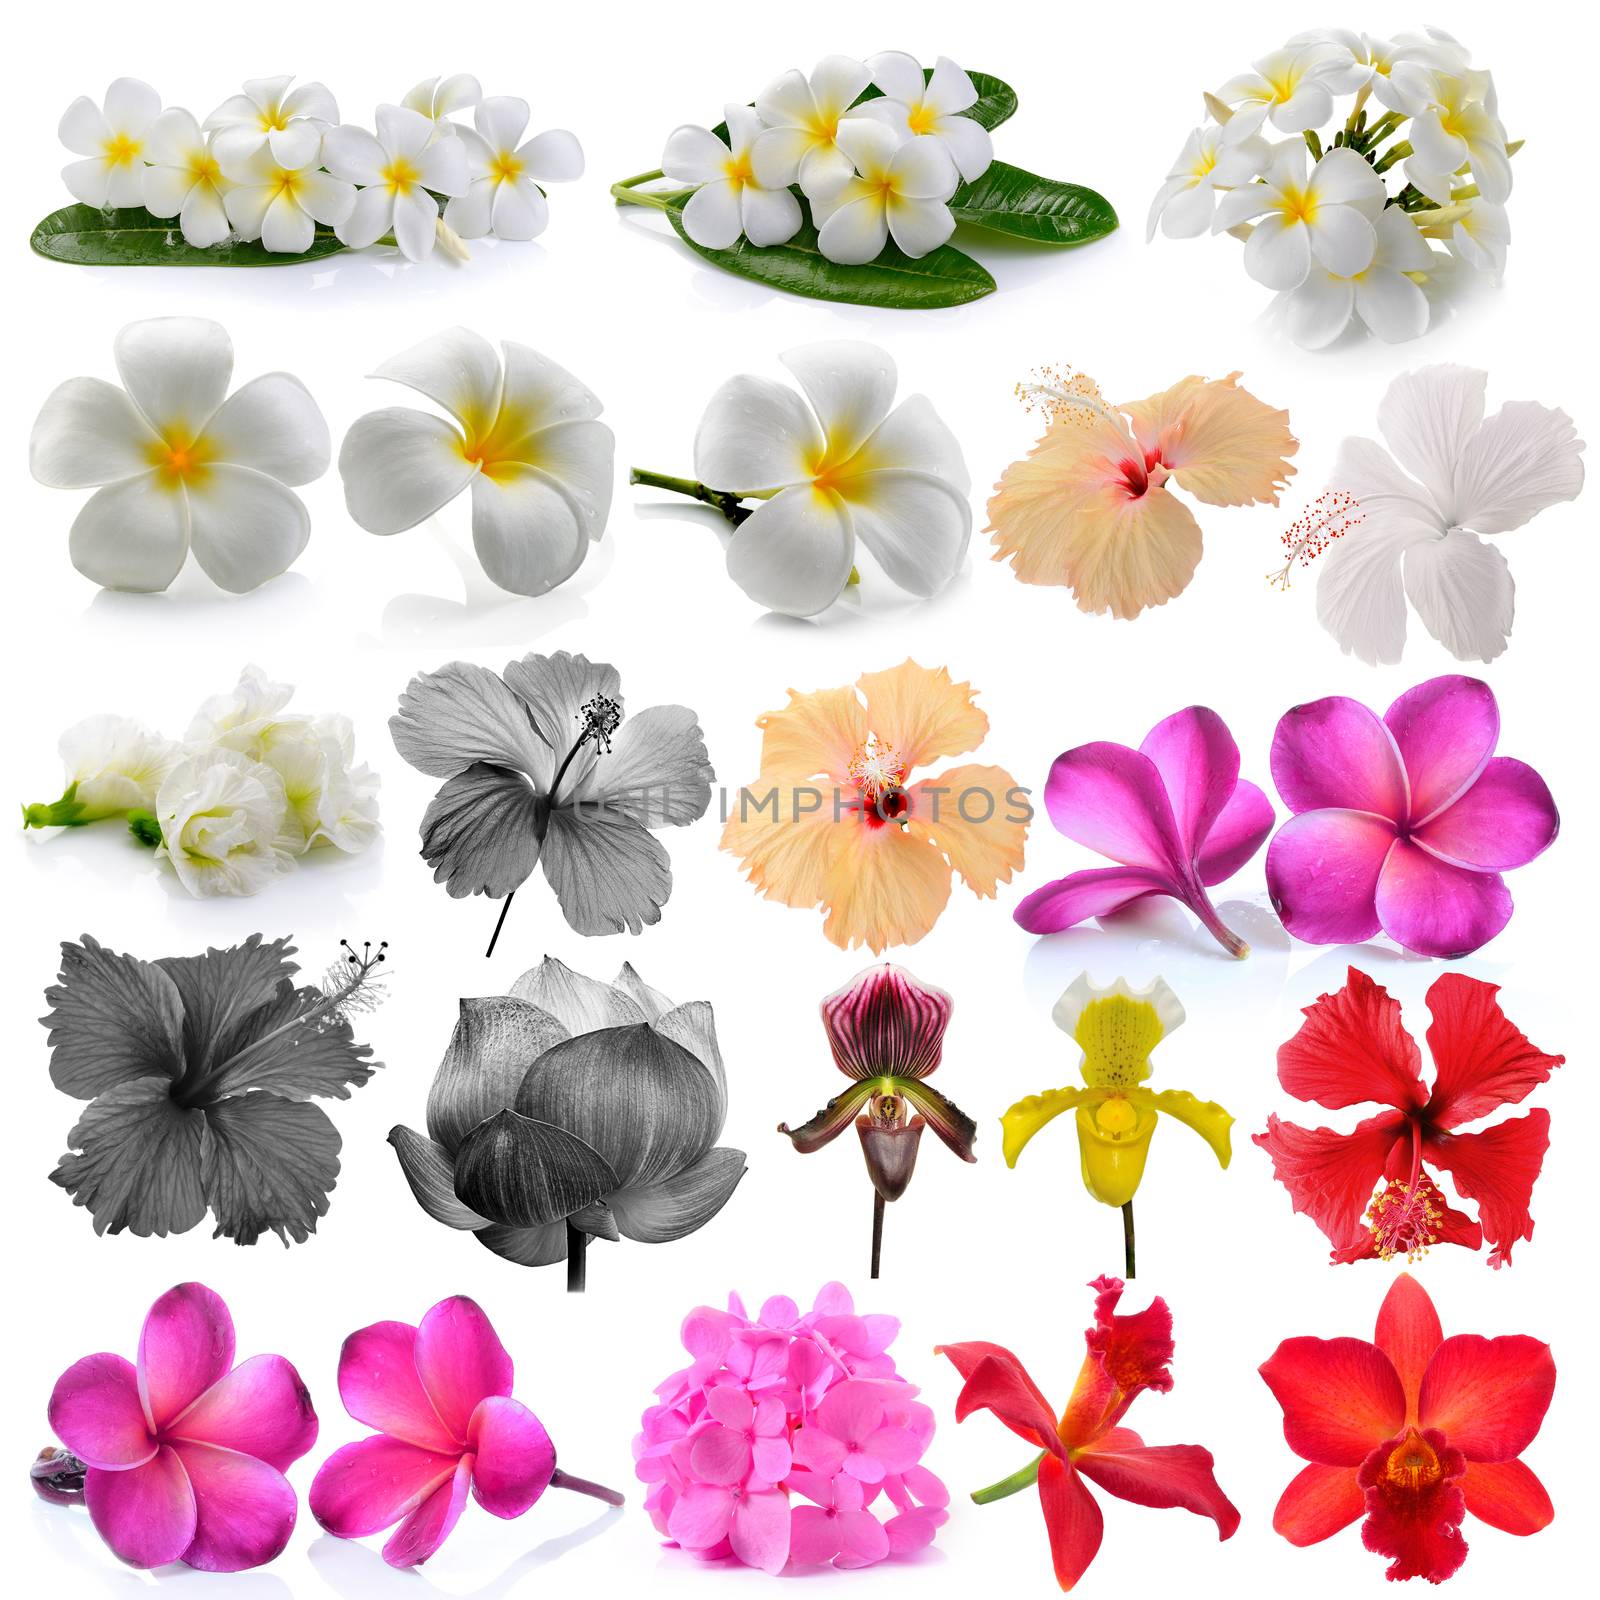 Orchid  Frangipani ,Asian pigeonwings, Flowers Isolated on White by sommai